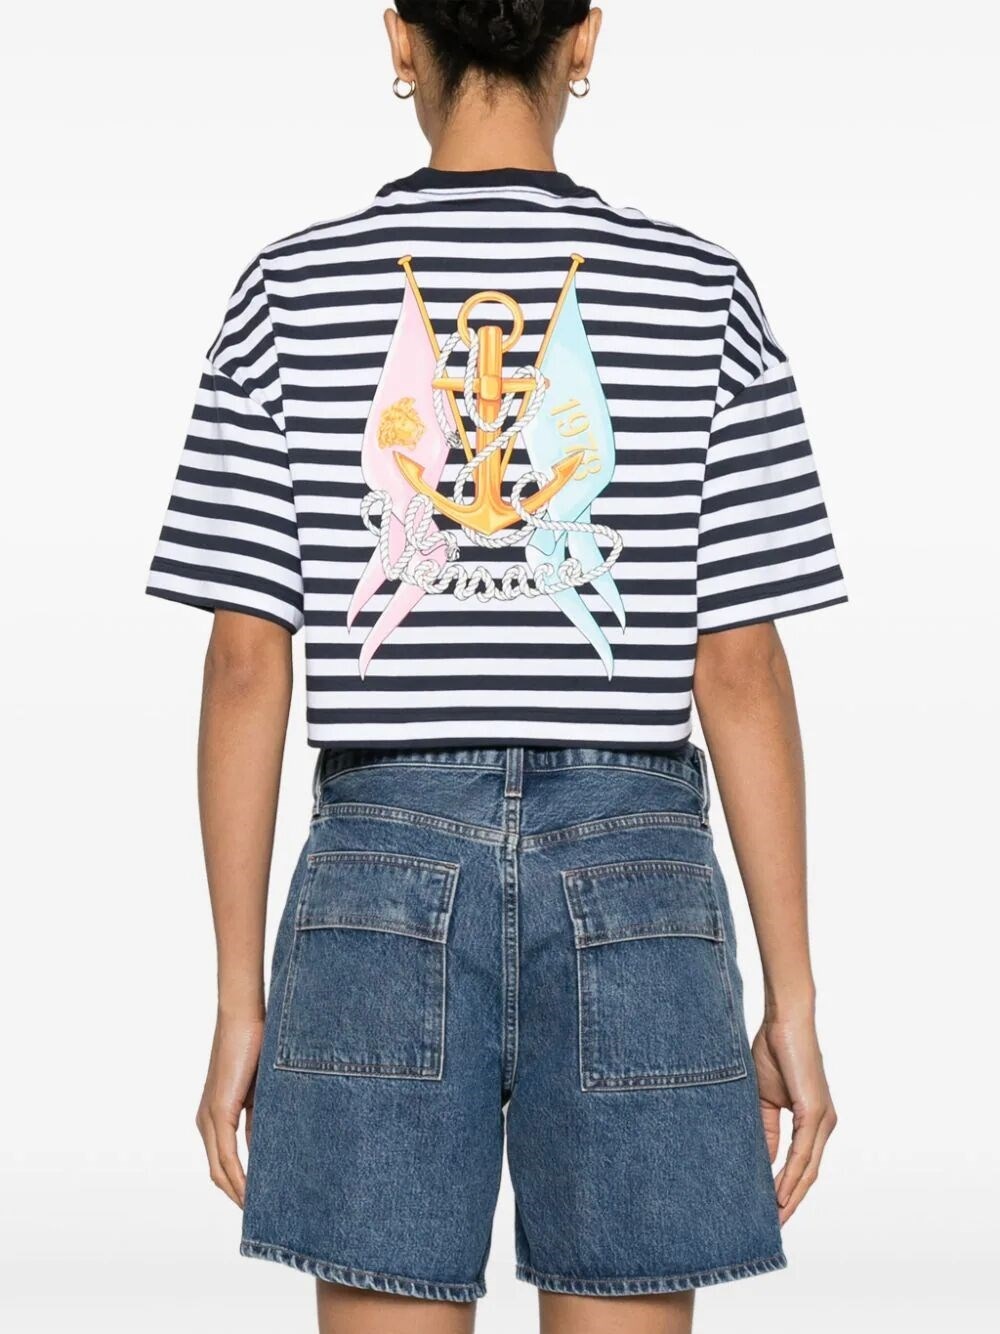 Nautical Stripes And Logo `Still Versace` Cropped T-Shirt - 5